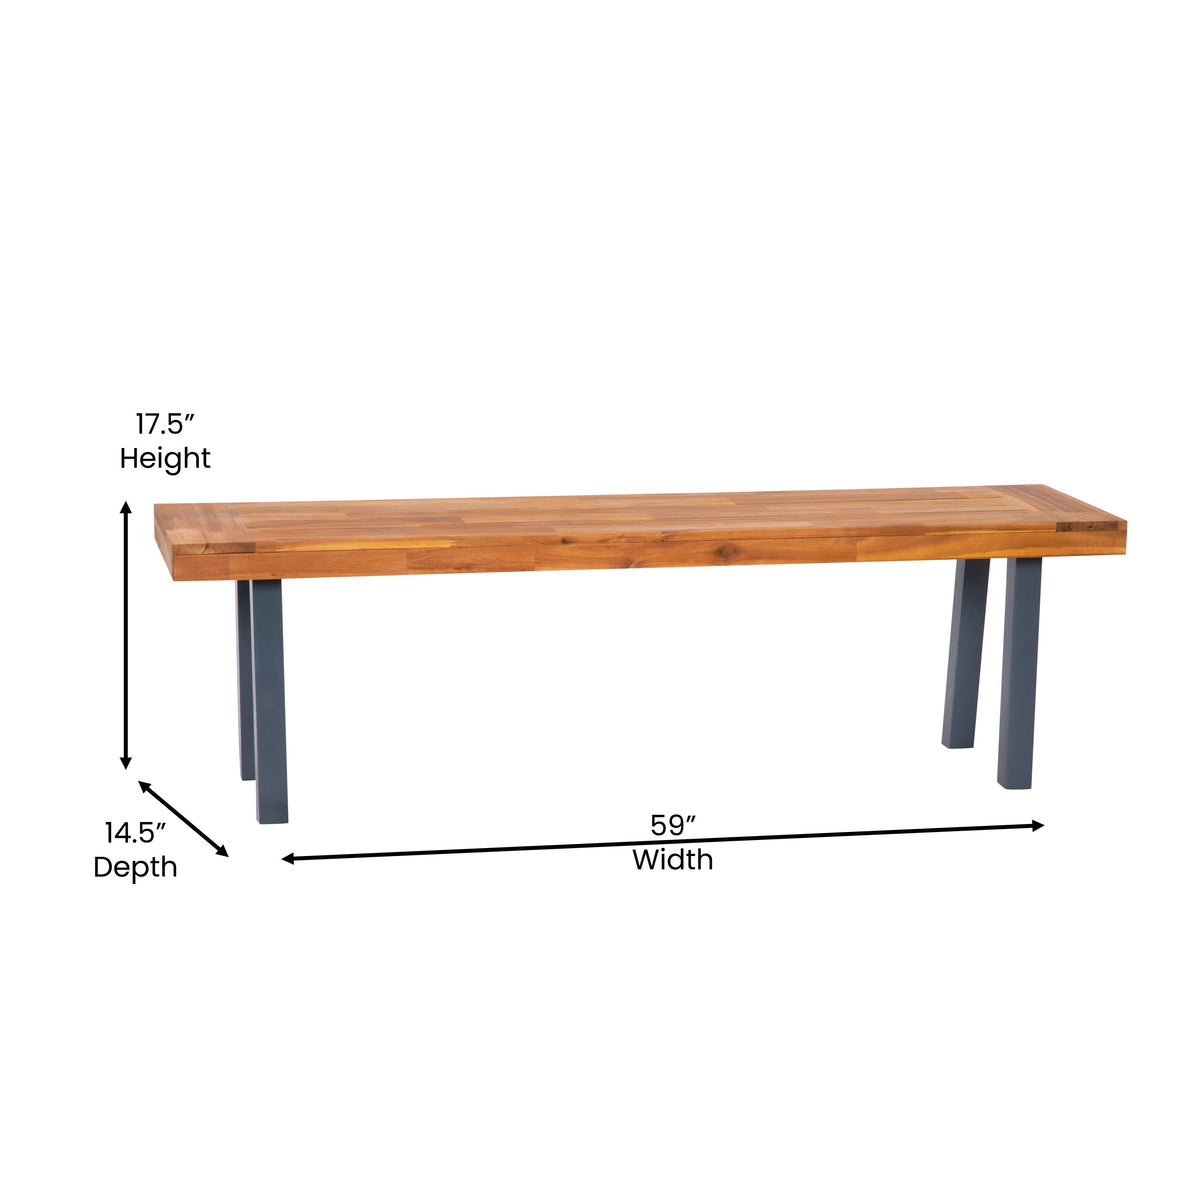 Indoor/Outdoor Solid Acacia Wood Slat Top Bench with Wood Legs - Natural/Black